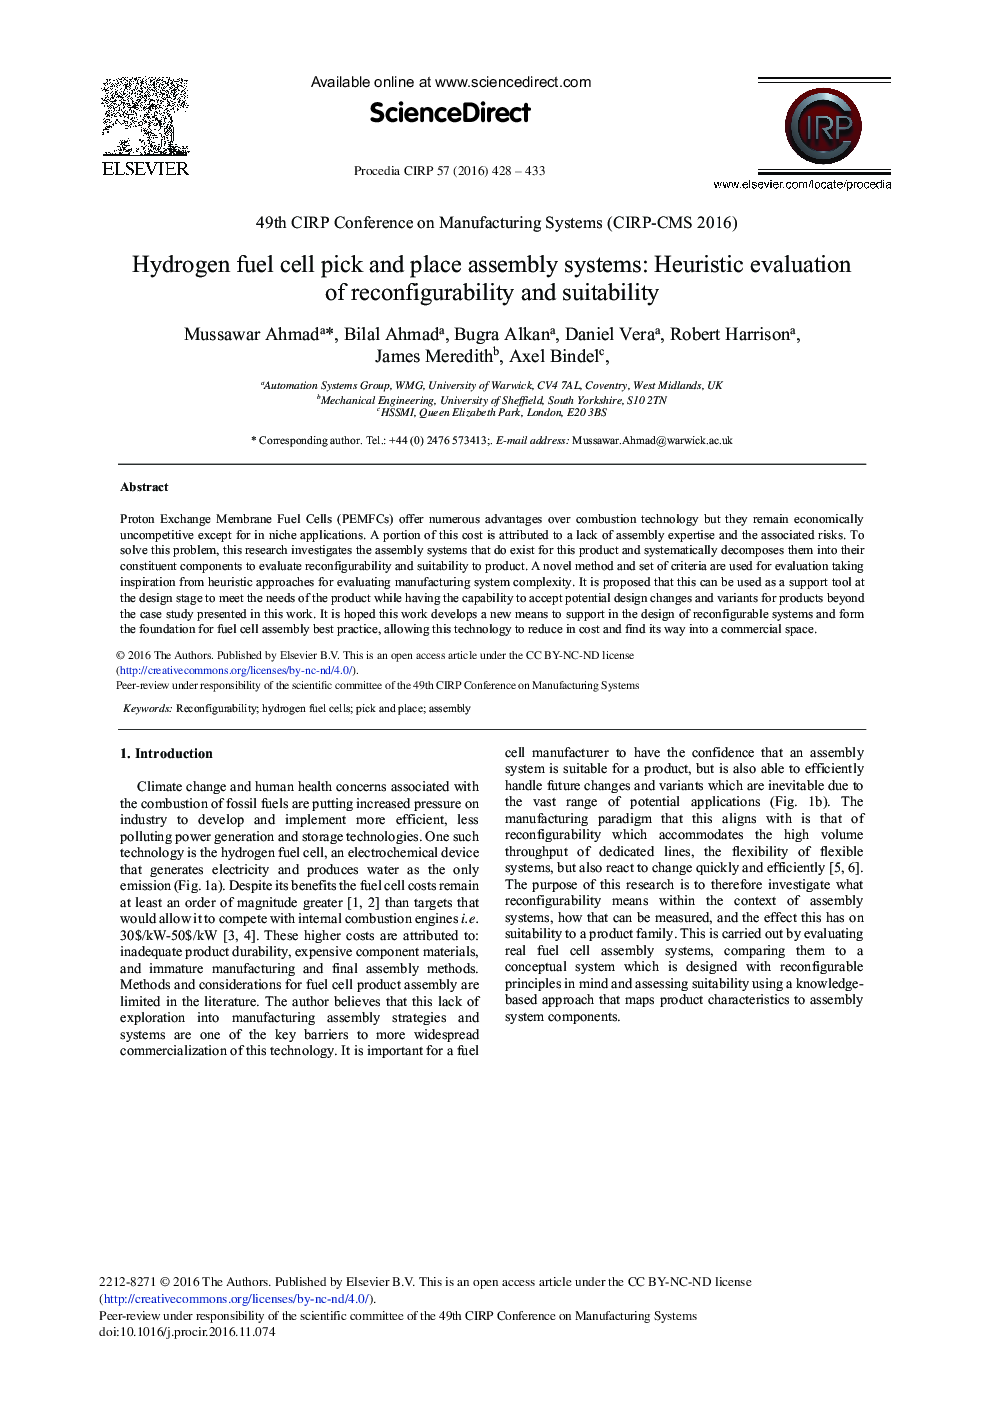 Hydrogen Fuel Cell Pick and Place Assembly Systems: Heuristic Evaluation of Reconfigurability and Suitability